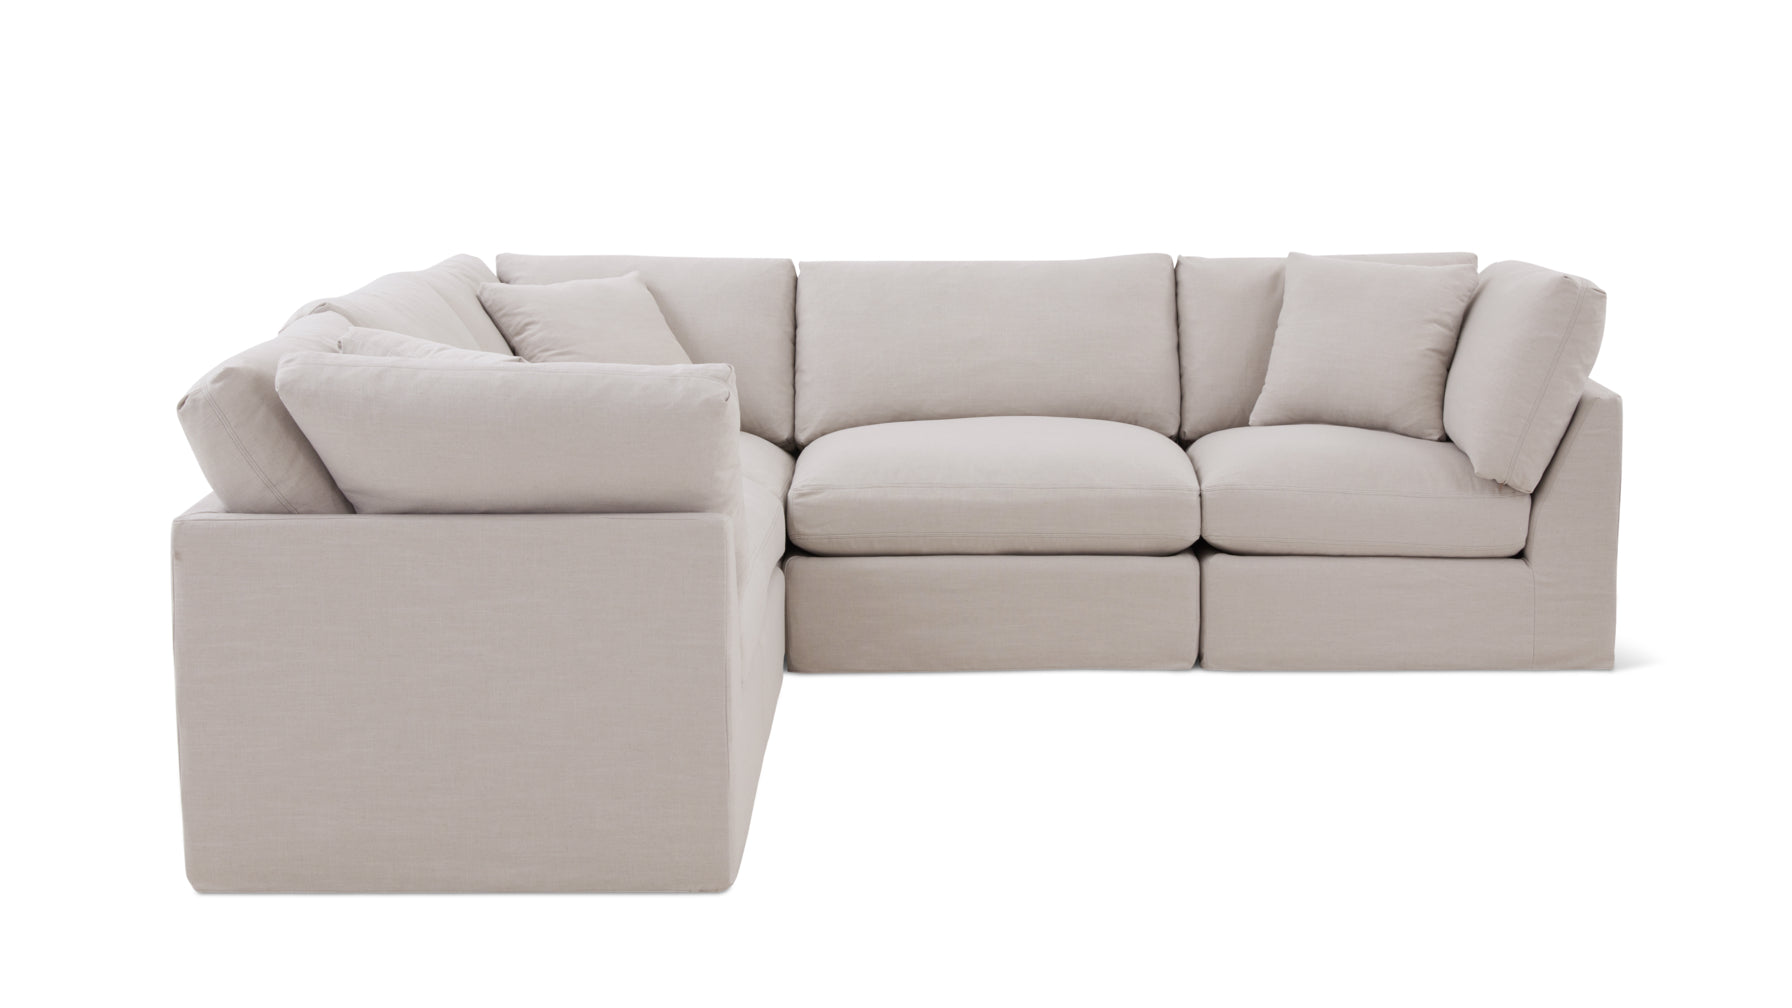 Get Together™ 5-Piece Modular Sectional Closed, Standard, Clay - Image 1